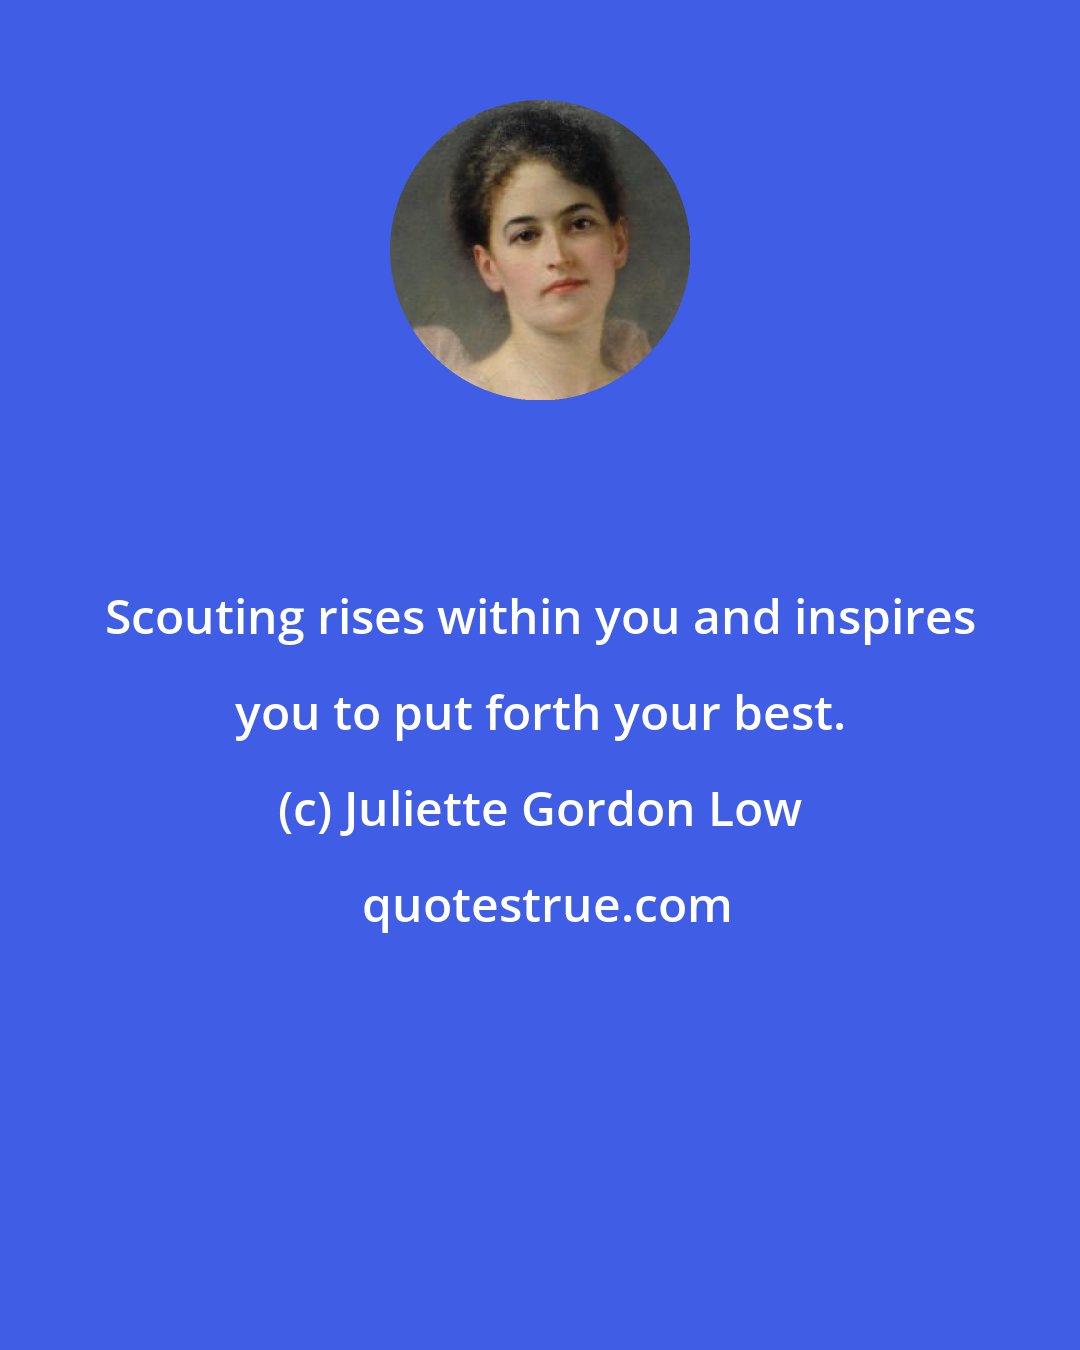 Juliette Gordon Low: Scouting rises within you and inspires you to put forth your best.